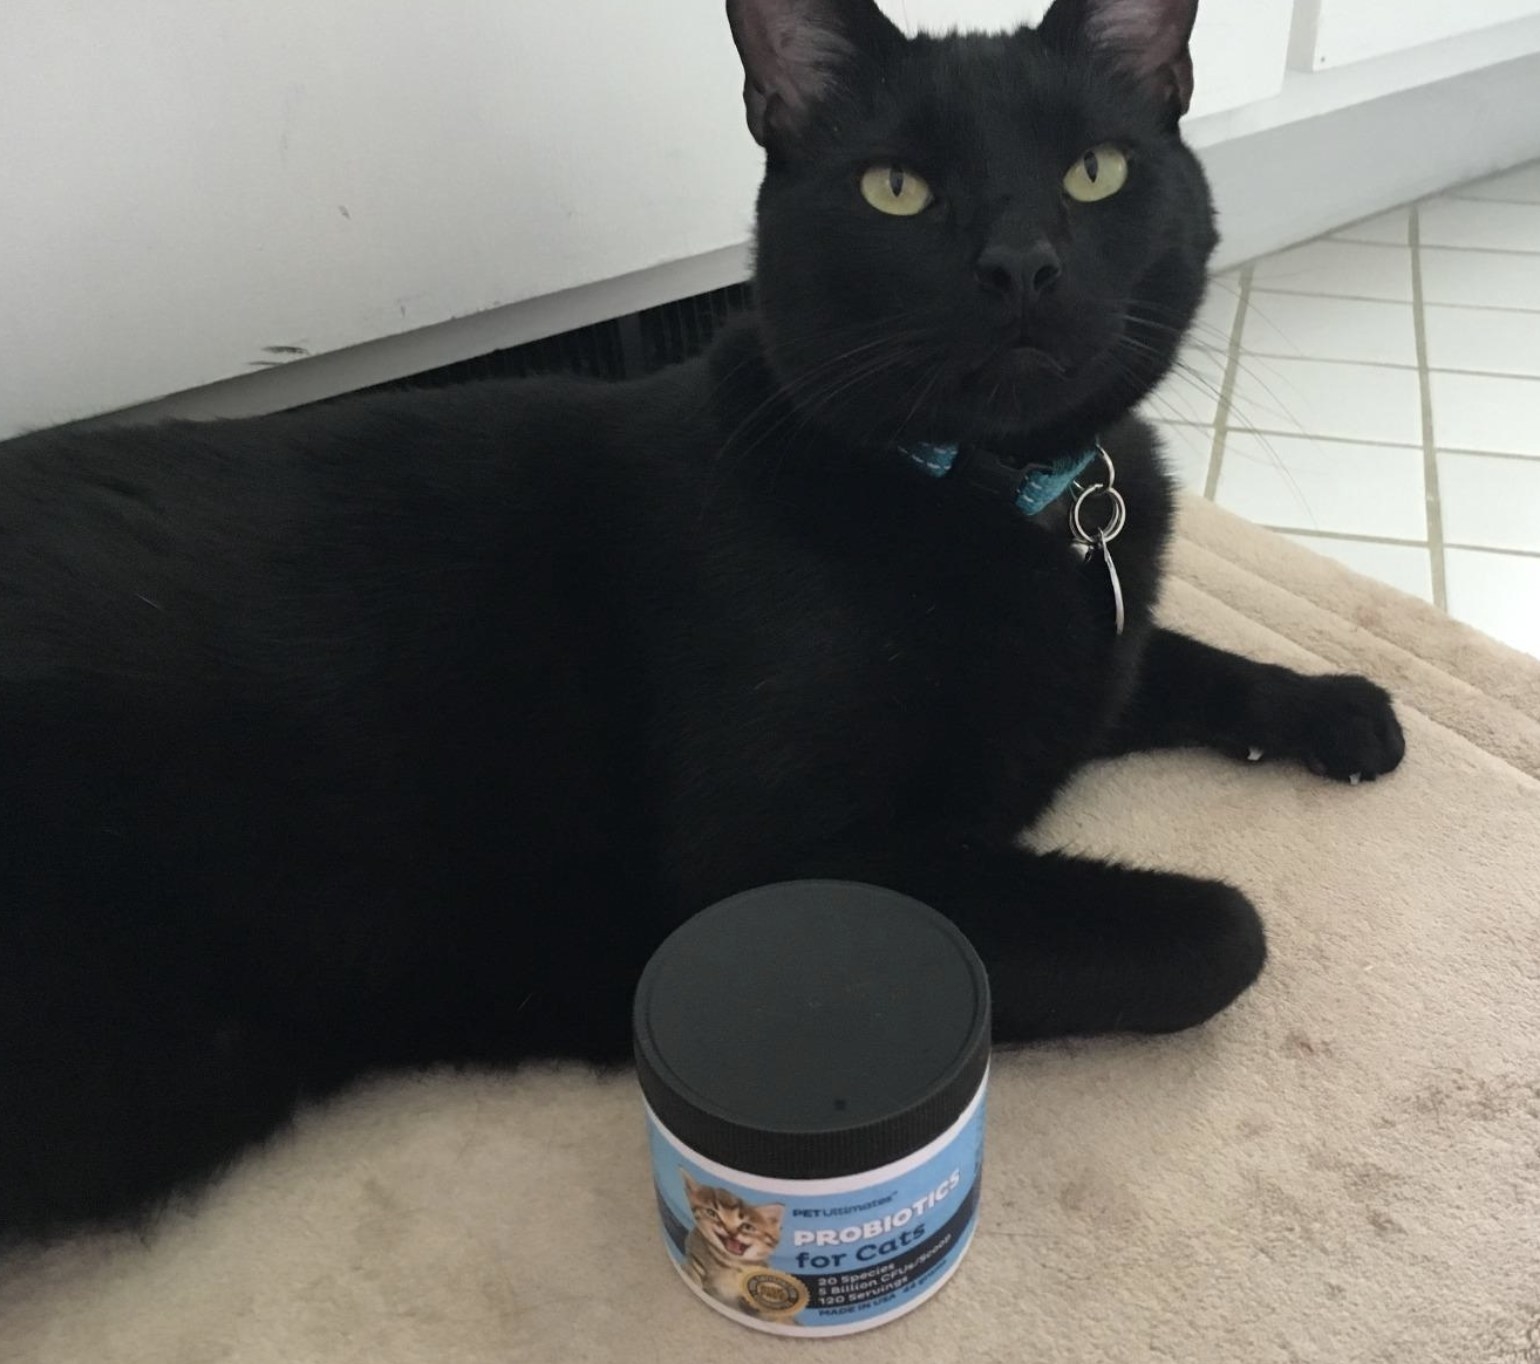 a black cat sitting on a floor with a bottle of probiotics in front of them